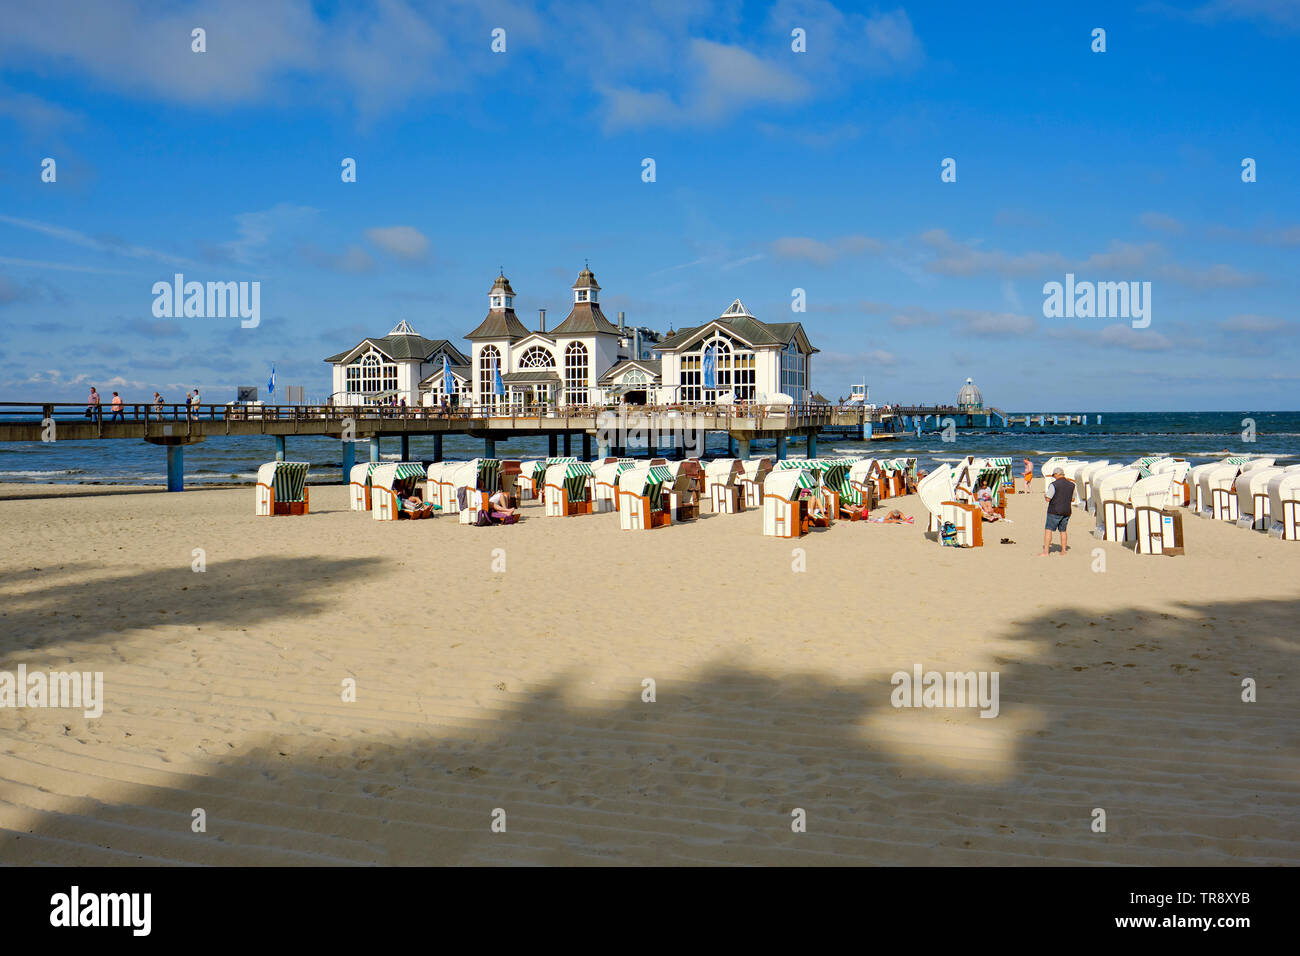 Sellin Baltic Sea resort town on the German island of Rügen, known for its beaches and Seebrücke (pier), with a 1920s-style pavilion. Stock Photo